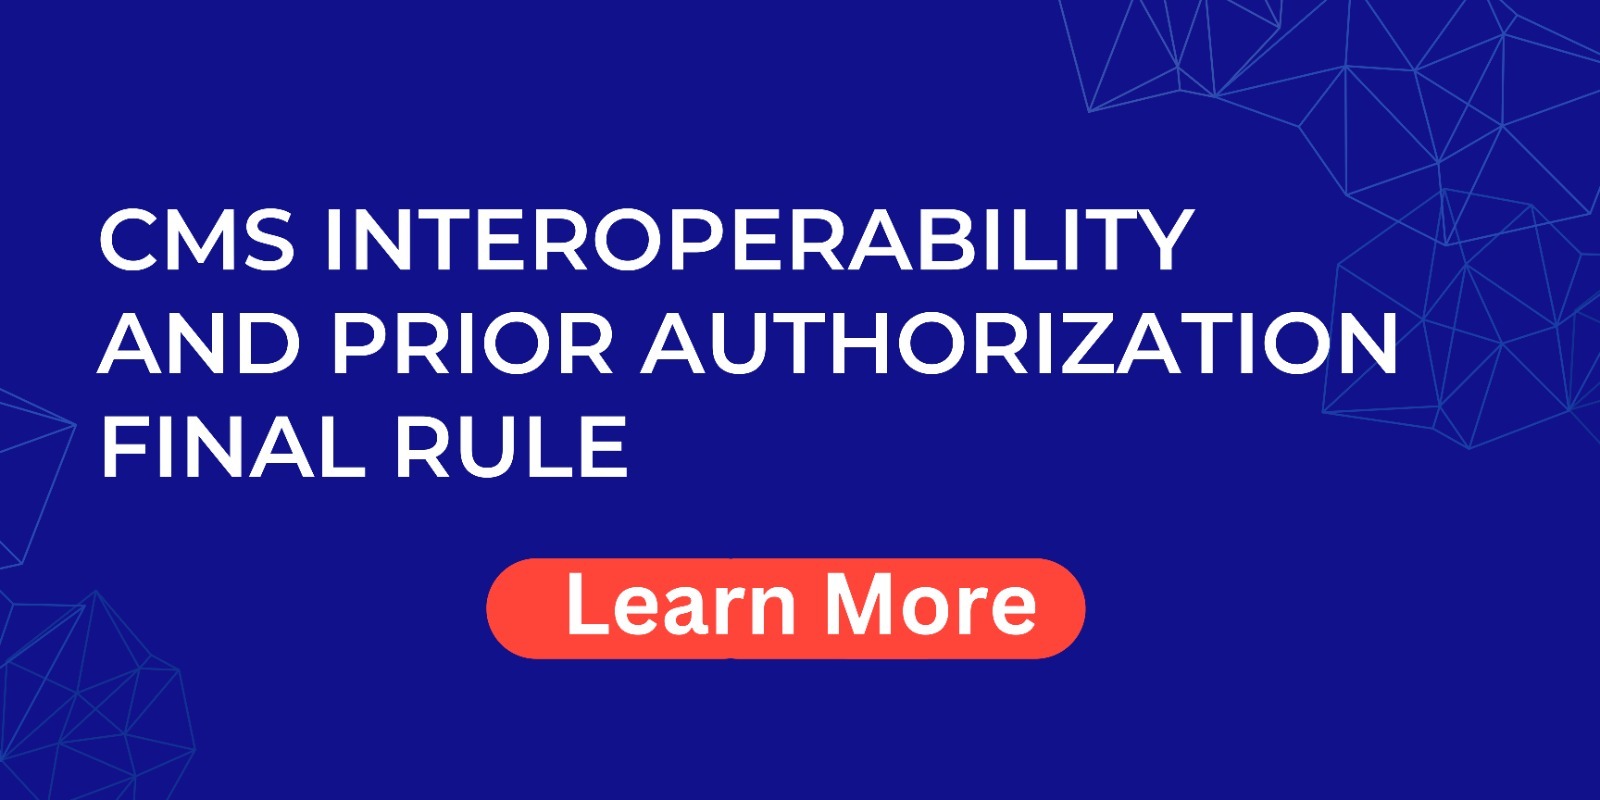 CMS Interoperability and Prior Authorization Final Rule